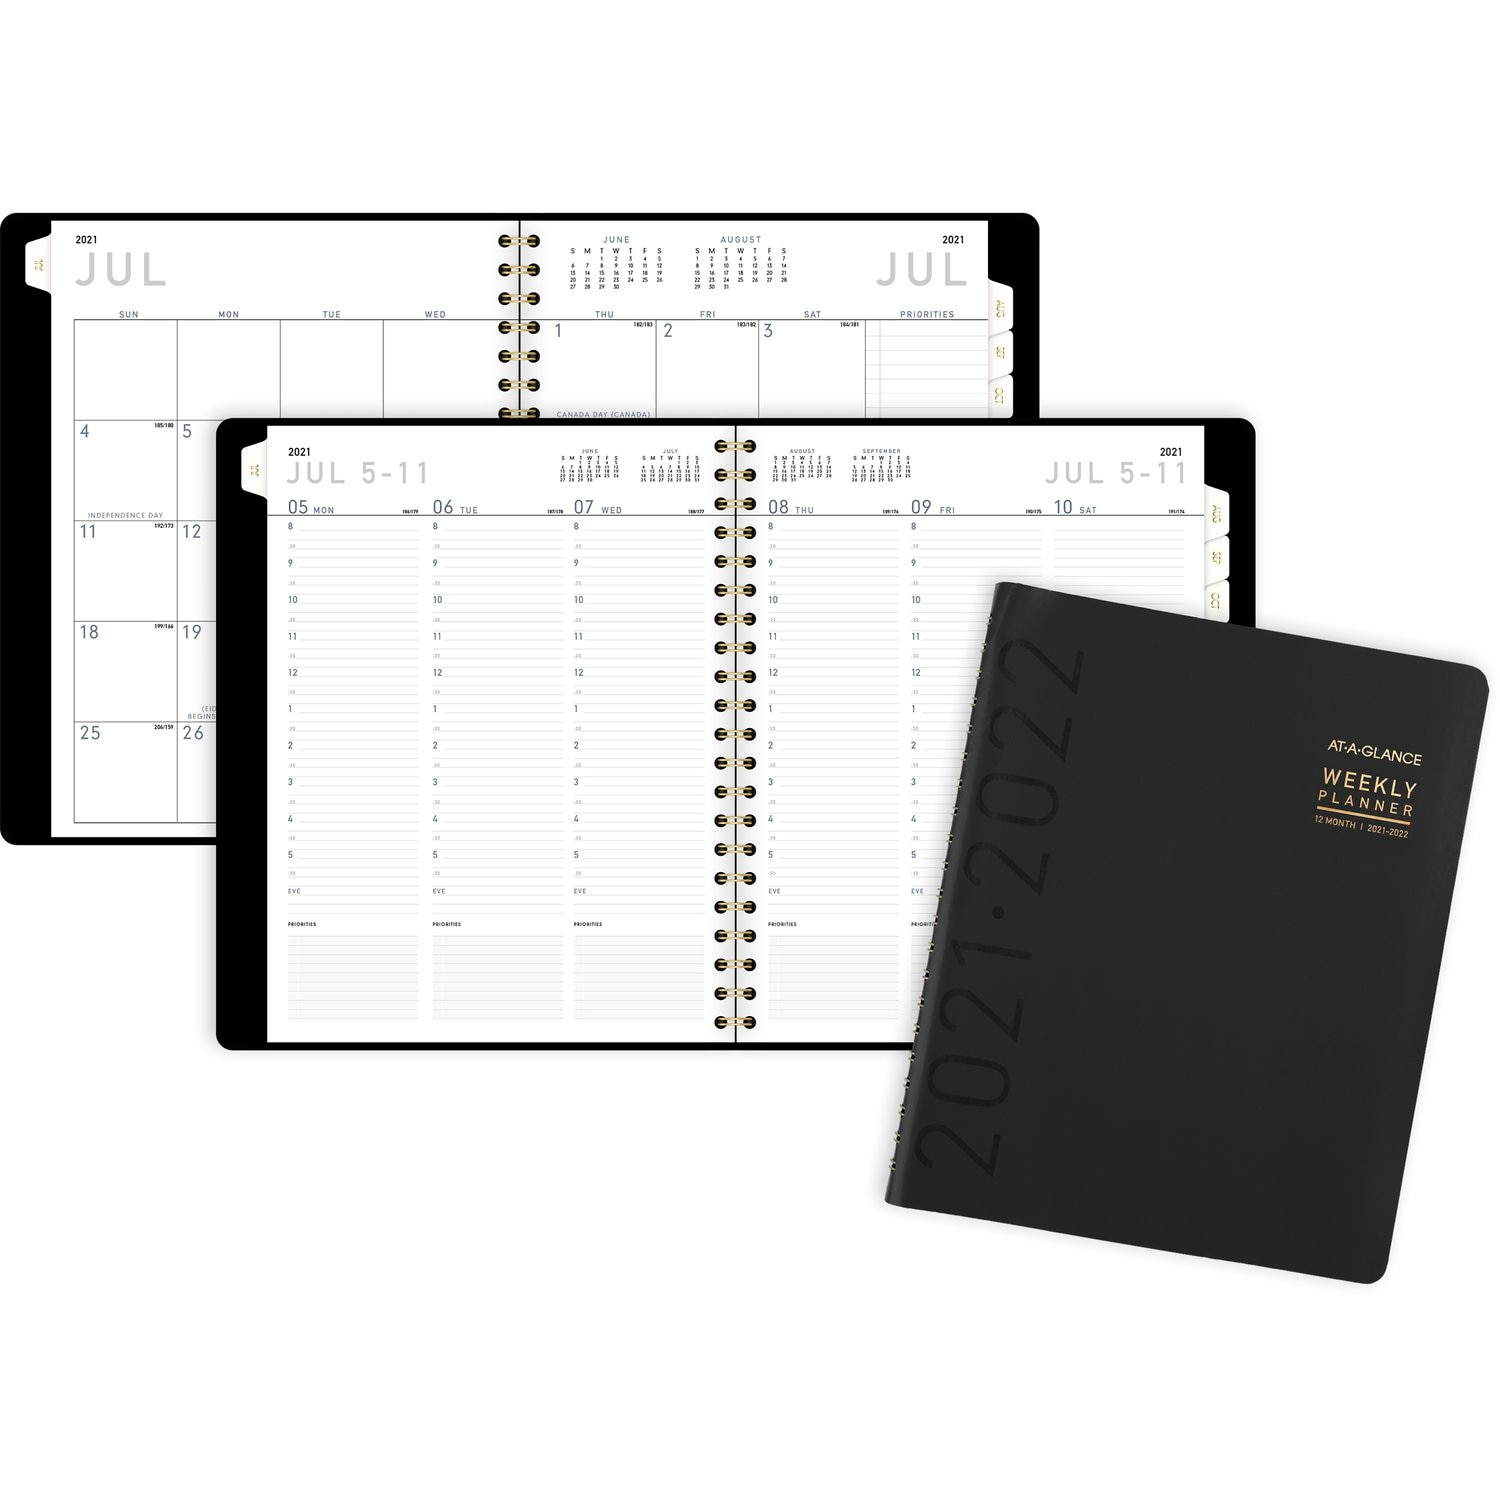 At a Glance Black Academic Year 21-22 Planner 8x11